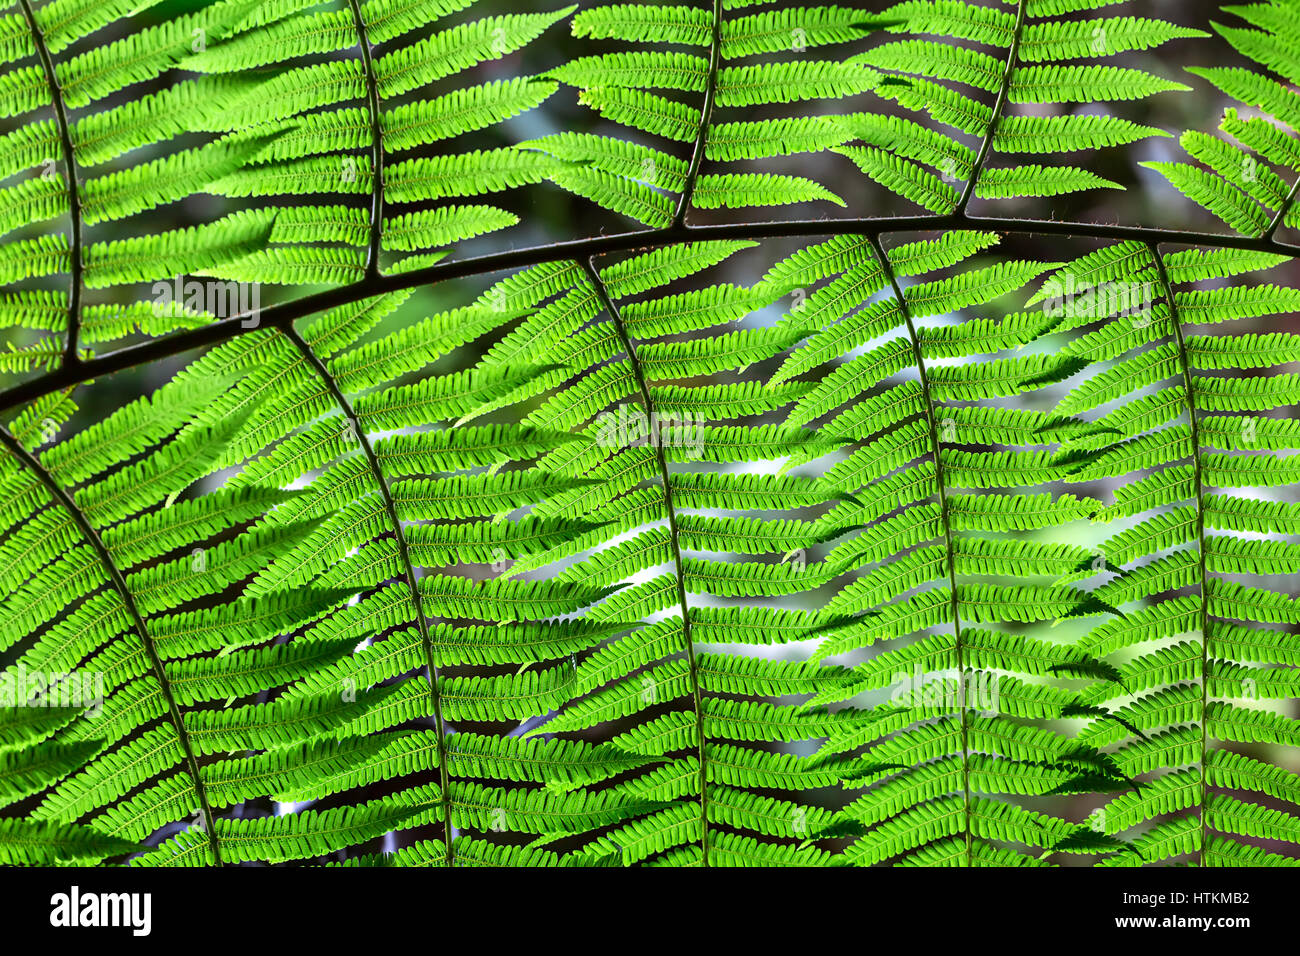 Amazing fern branch with green leaves on the blurry nature background. Closeup photo. Horizontal. Stock Photo